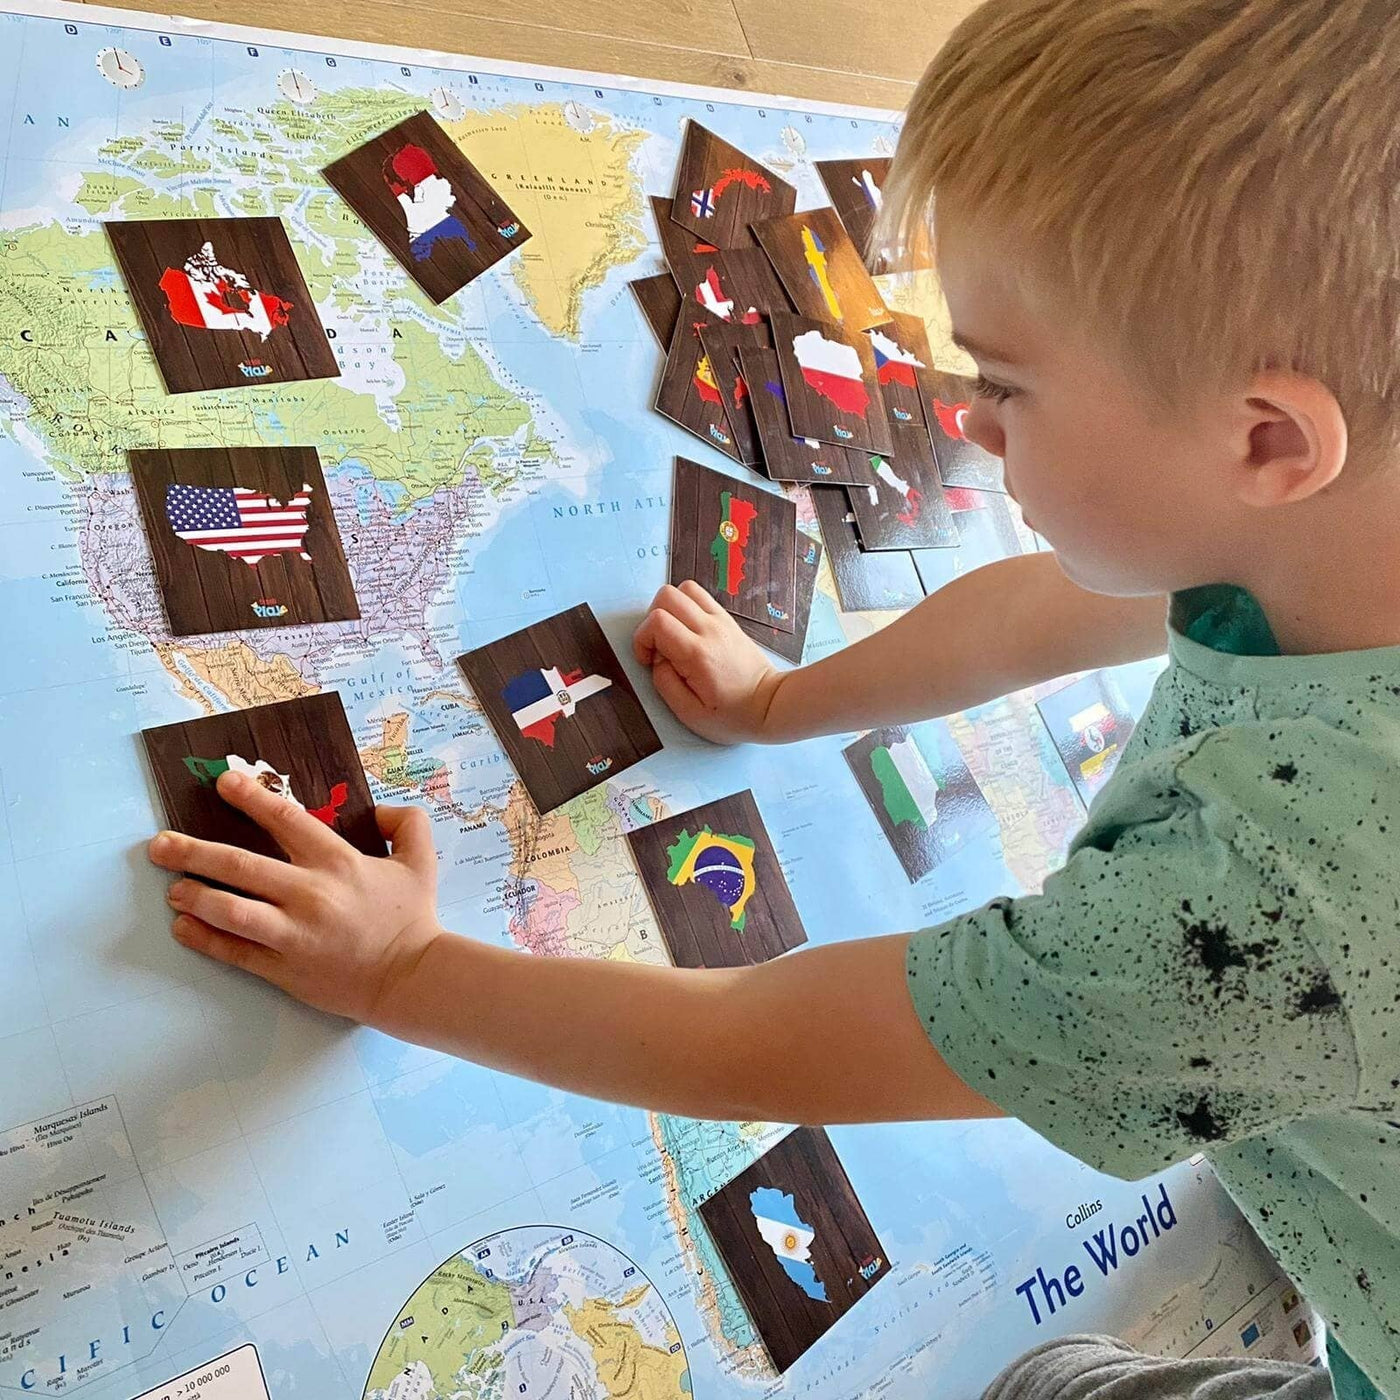 Teddo Play Popular Countries, Cities and Flags of the World -Geography Educational Learning Card Set